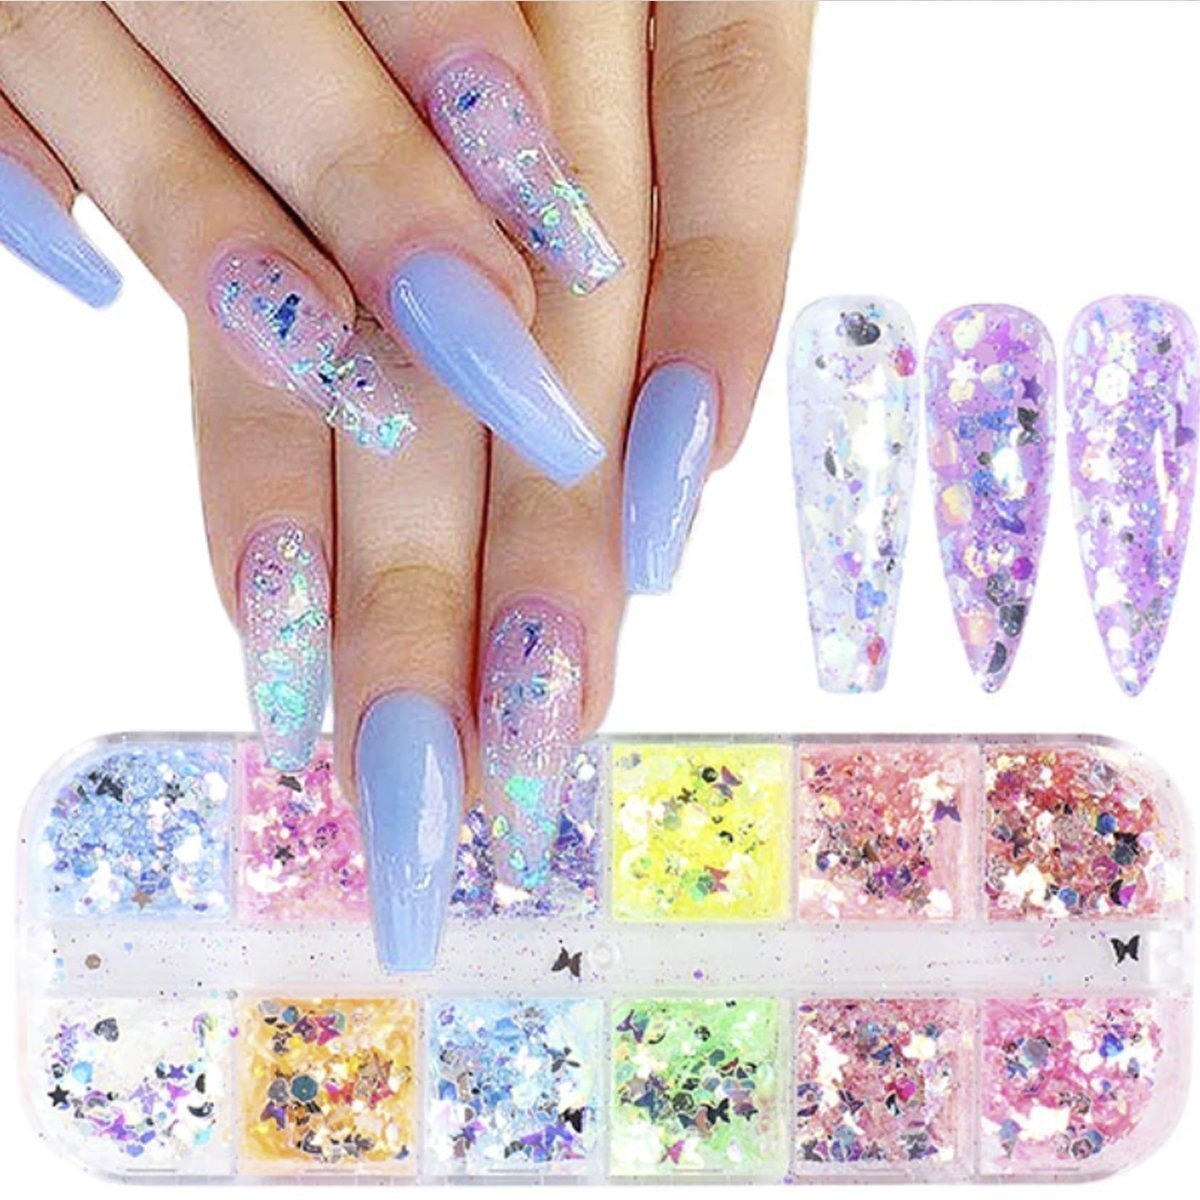 Holographic Nail Paillette Fruit Heart Butterfly Mirror Slices Art Sequins Flakes Irregular - Tube